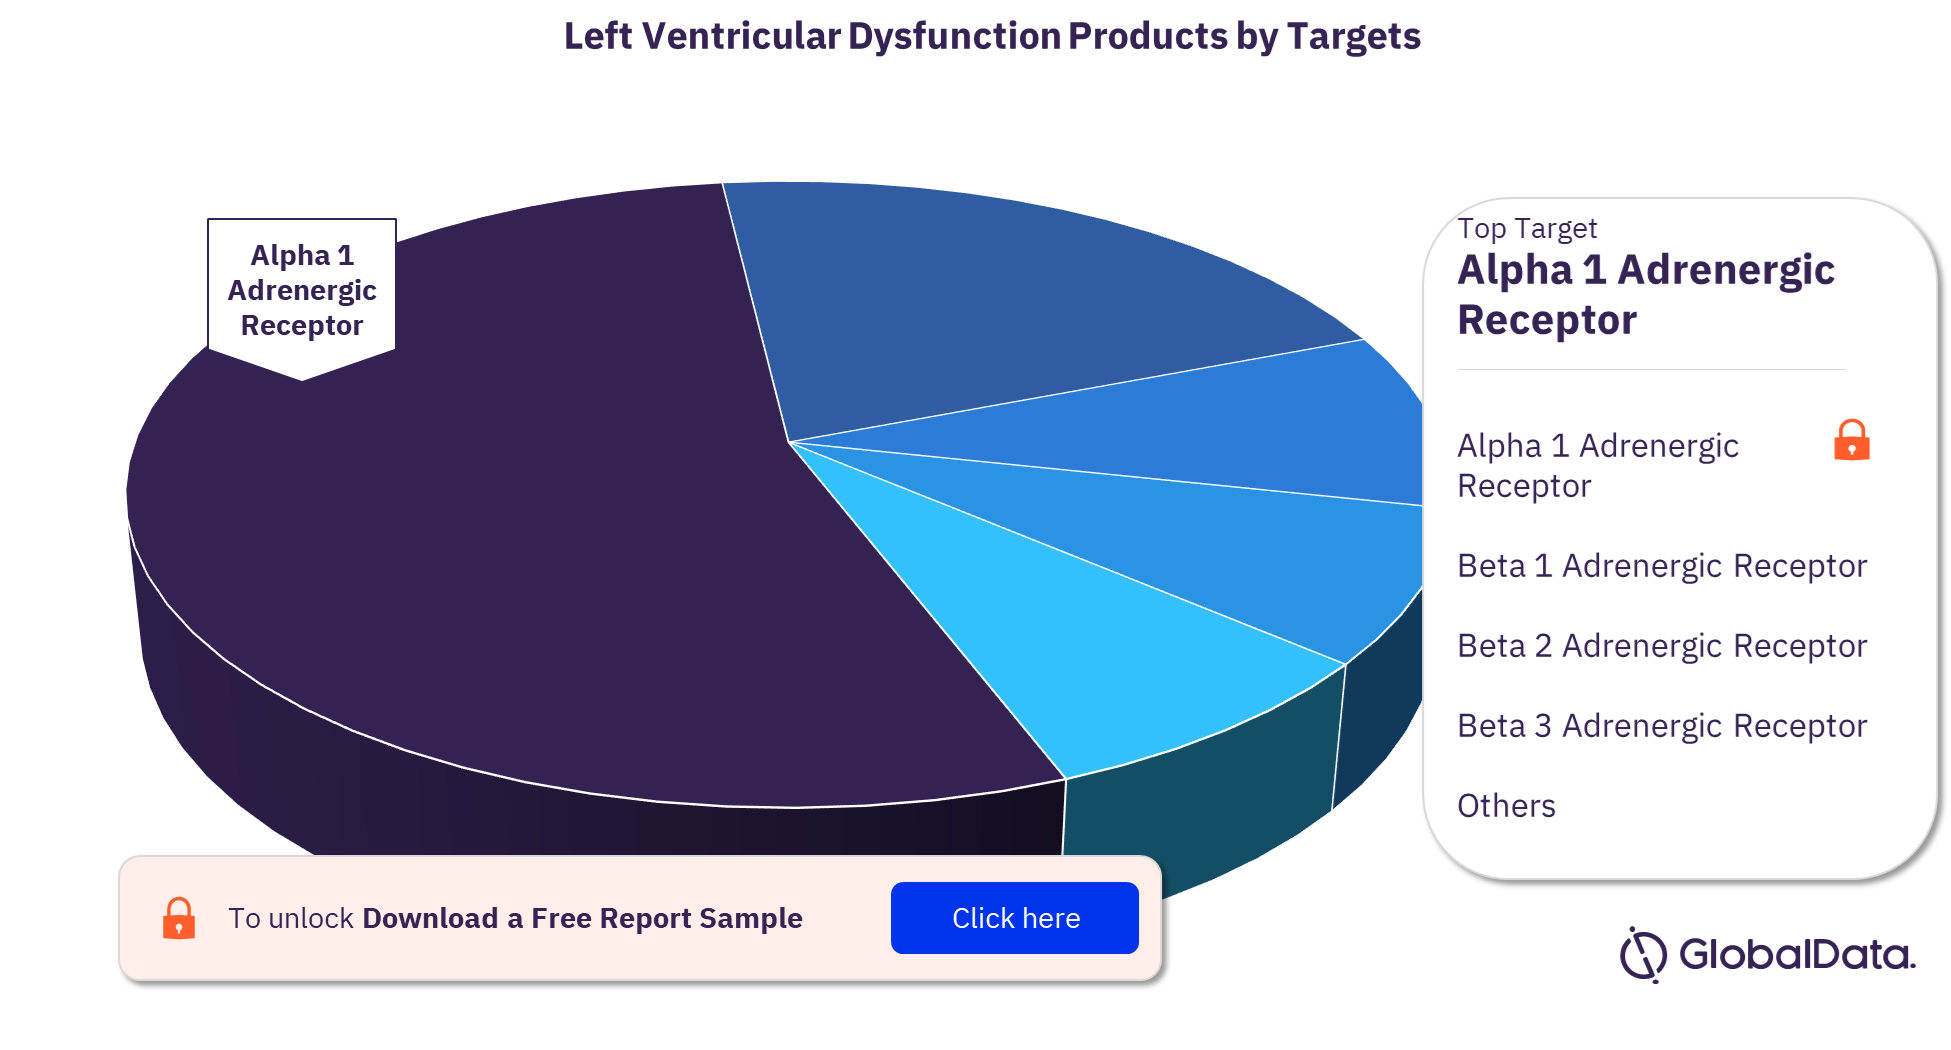 Left Ventricular Dysfunction Pipeline Products by Targets